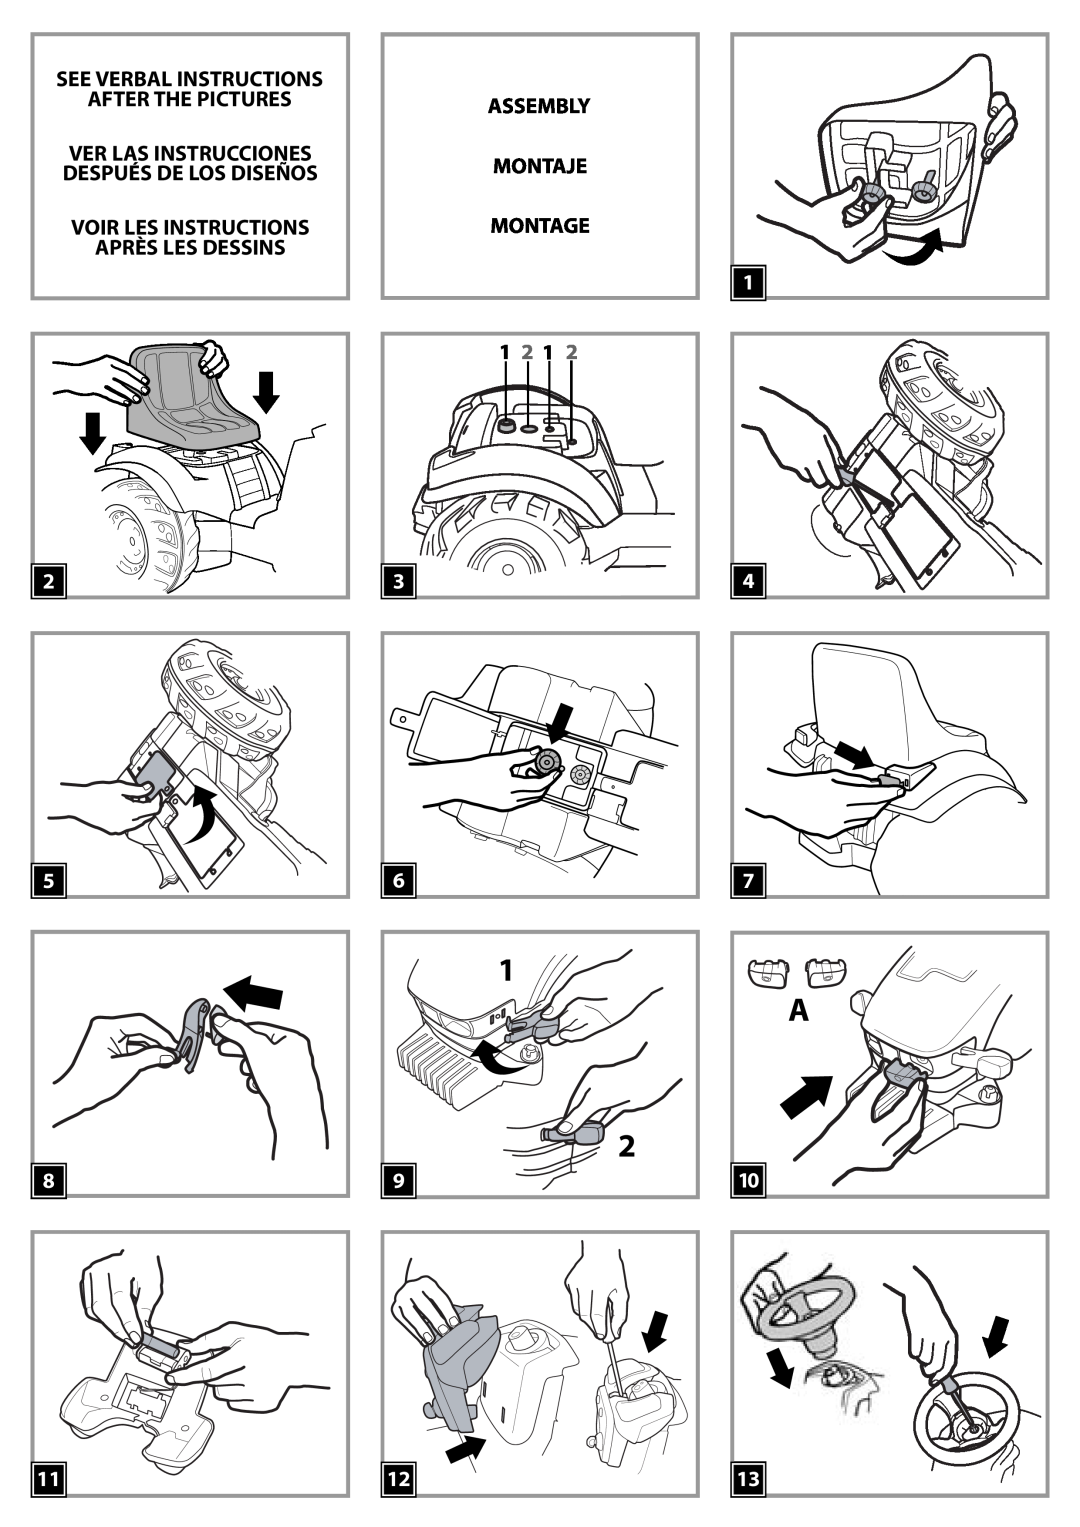 Peg-Perego IGED1061 6V manual See Verbal Instructions After The Pictures, Voir Les Instructions Après Les Dessins 